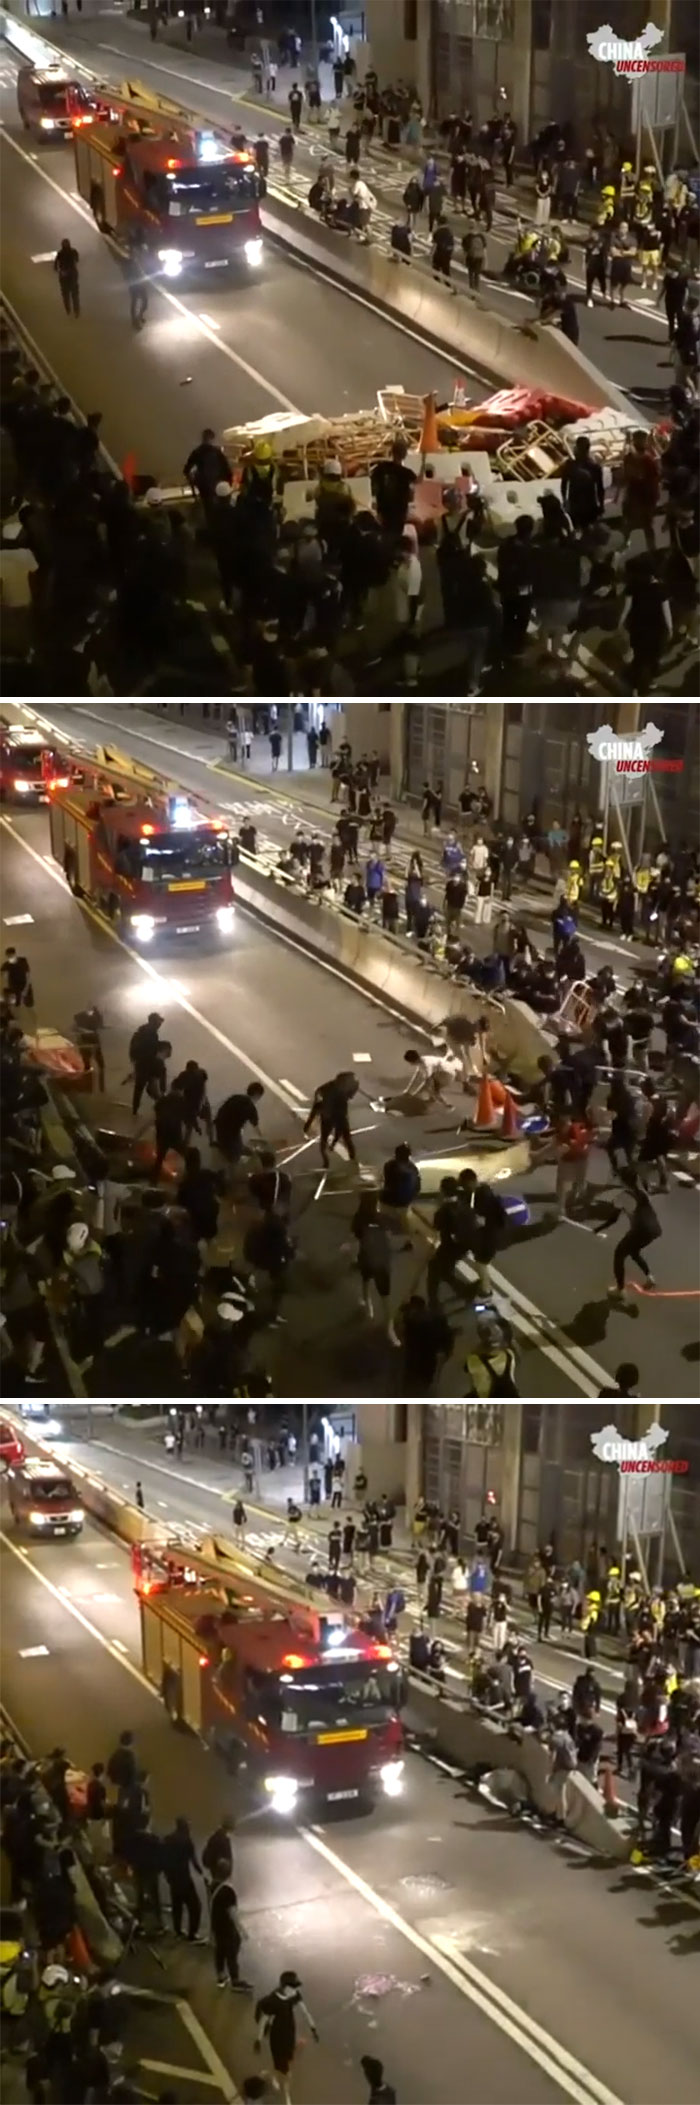 Hong Kong Protesters Completely Dismantle A Road Barricade In 22 Seconds So As To Let The Fire Truck To Access